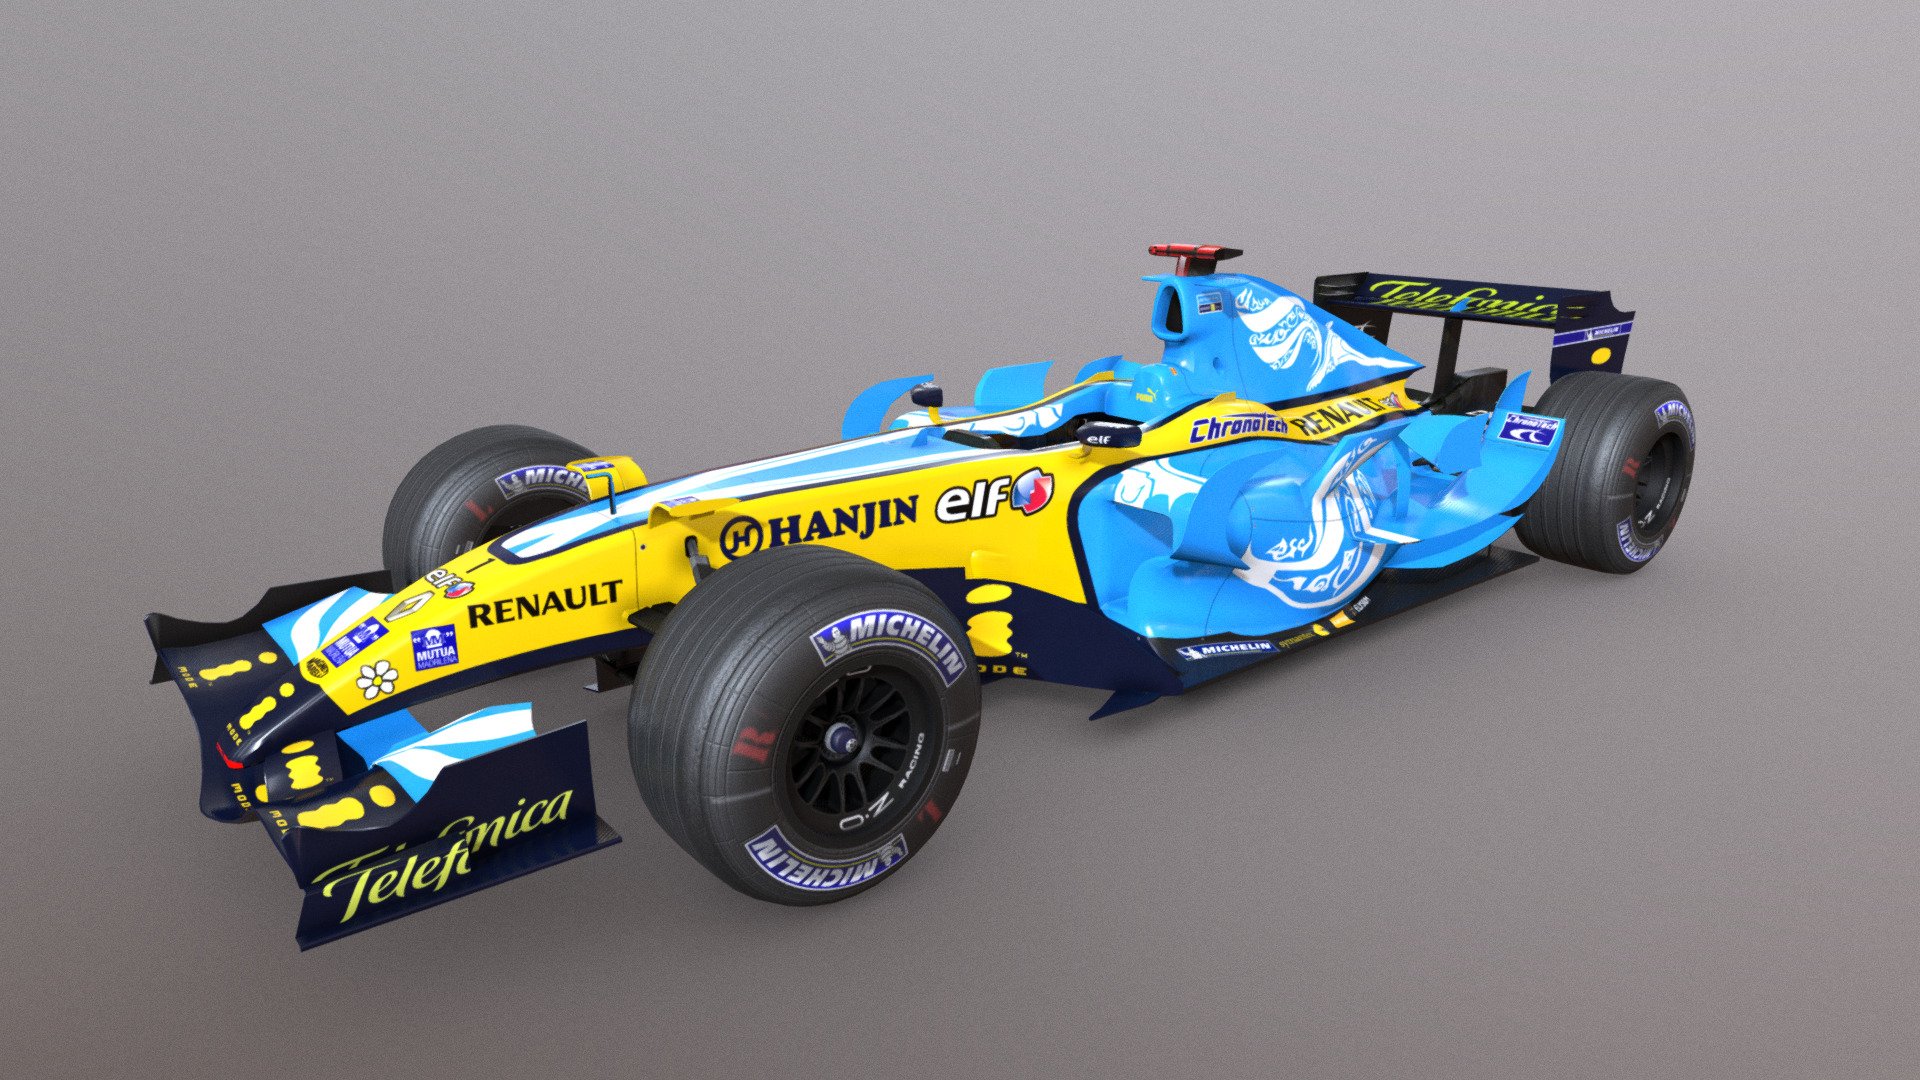 The Renault R26 was created in 2006 for CTDP's F1 2006 mod for rFactor. Textures by Raul Gullon 3d model